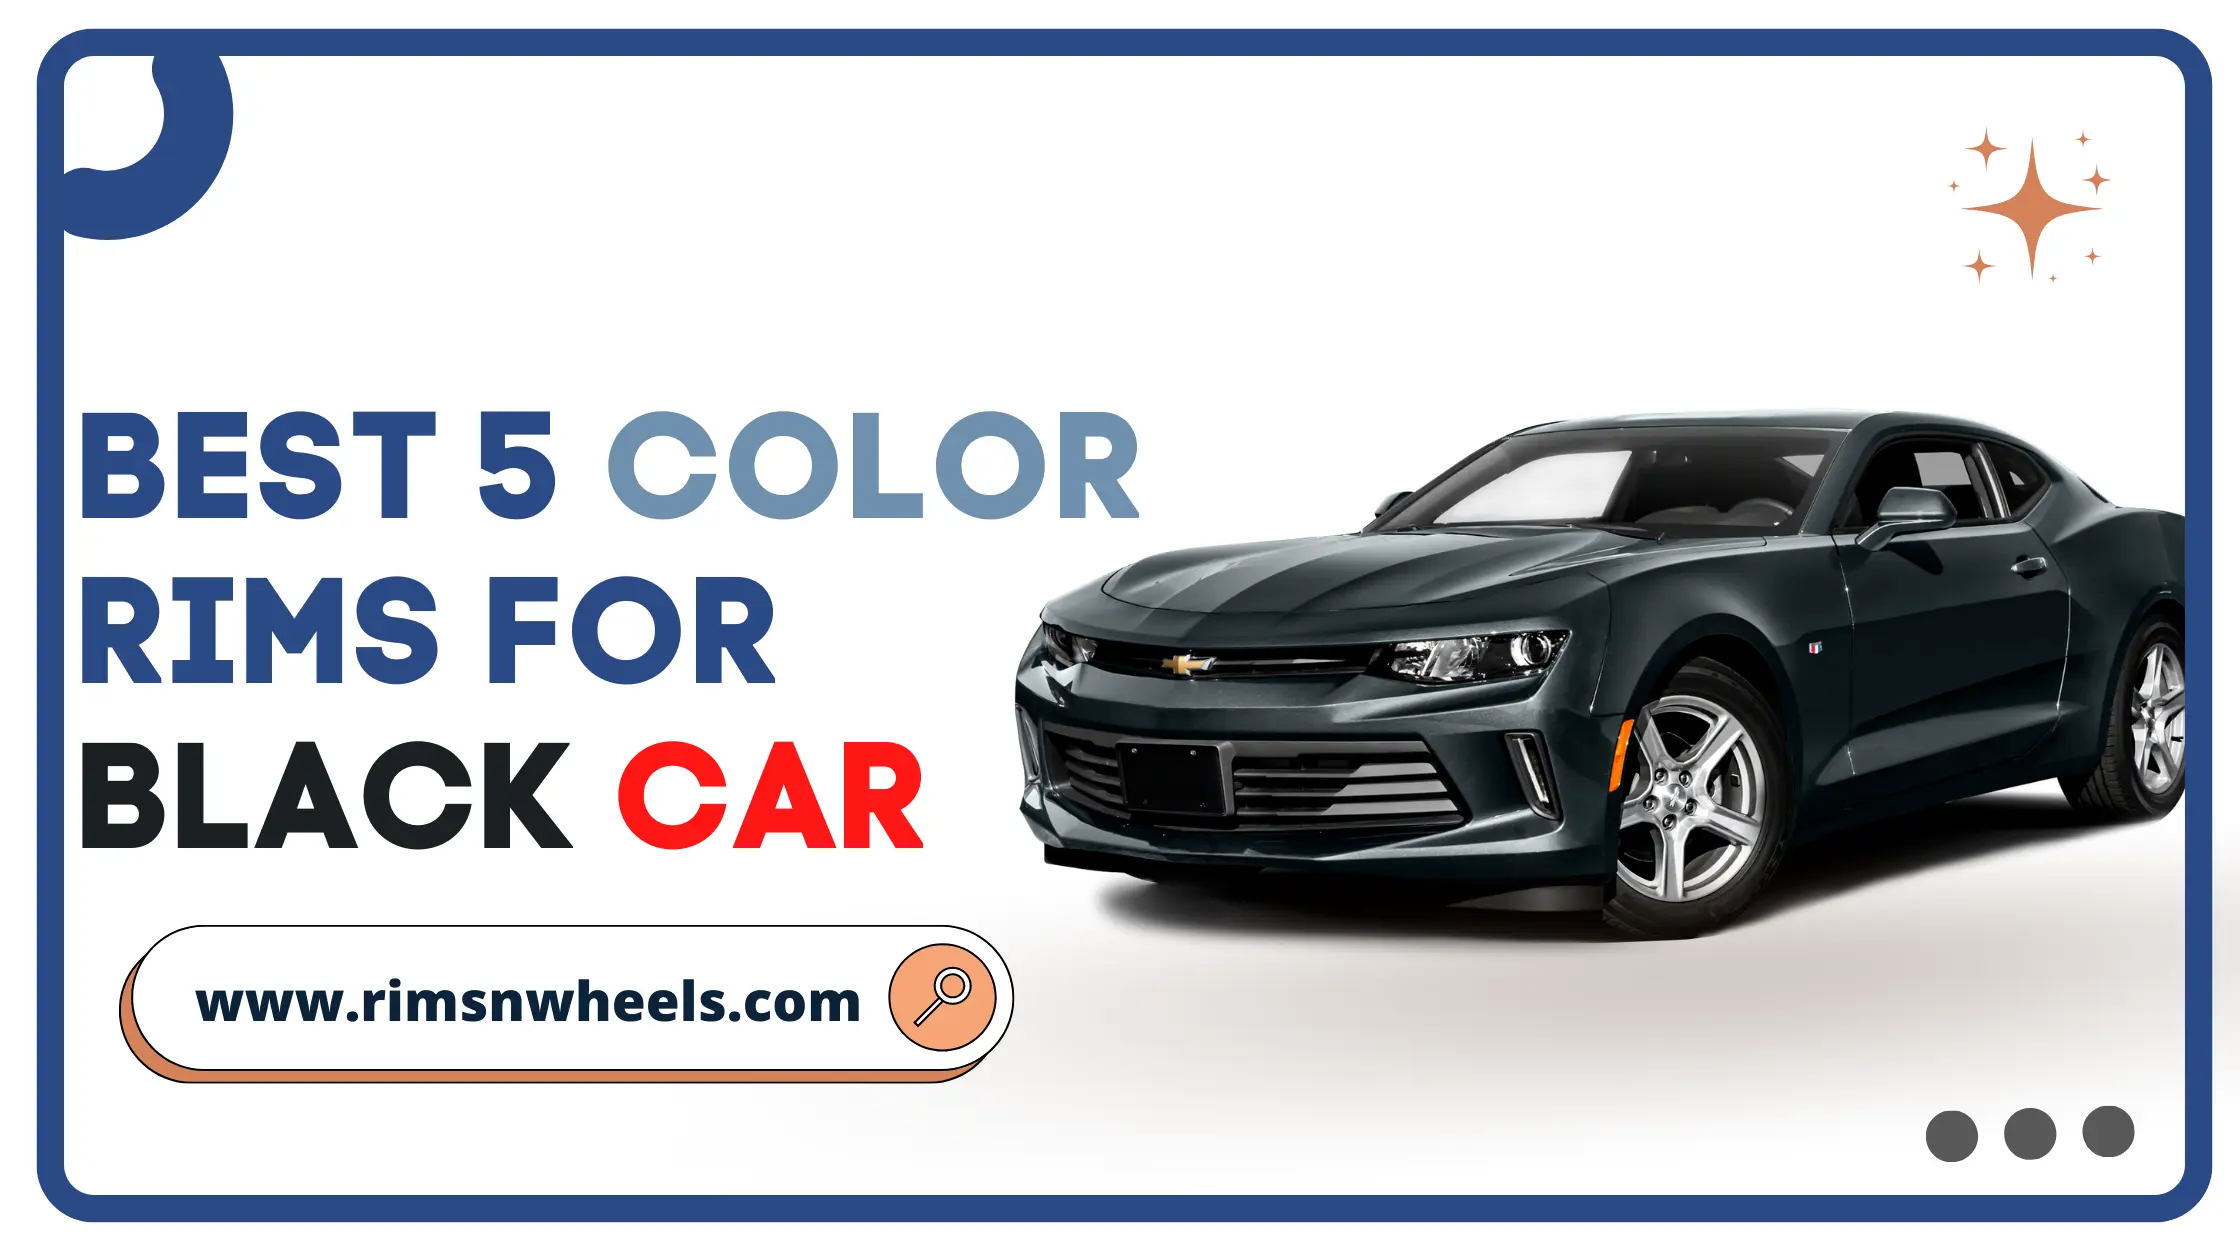 Collection of 5 Best Color Rims For Black Car in 2022